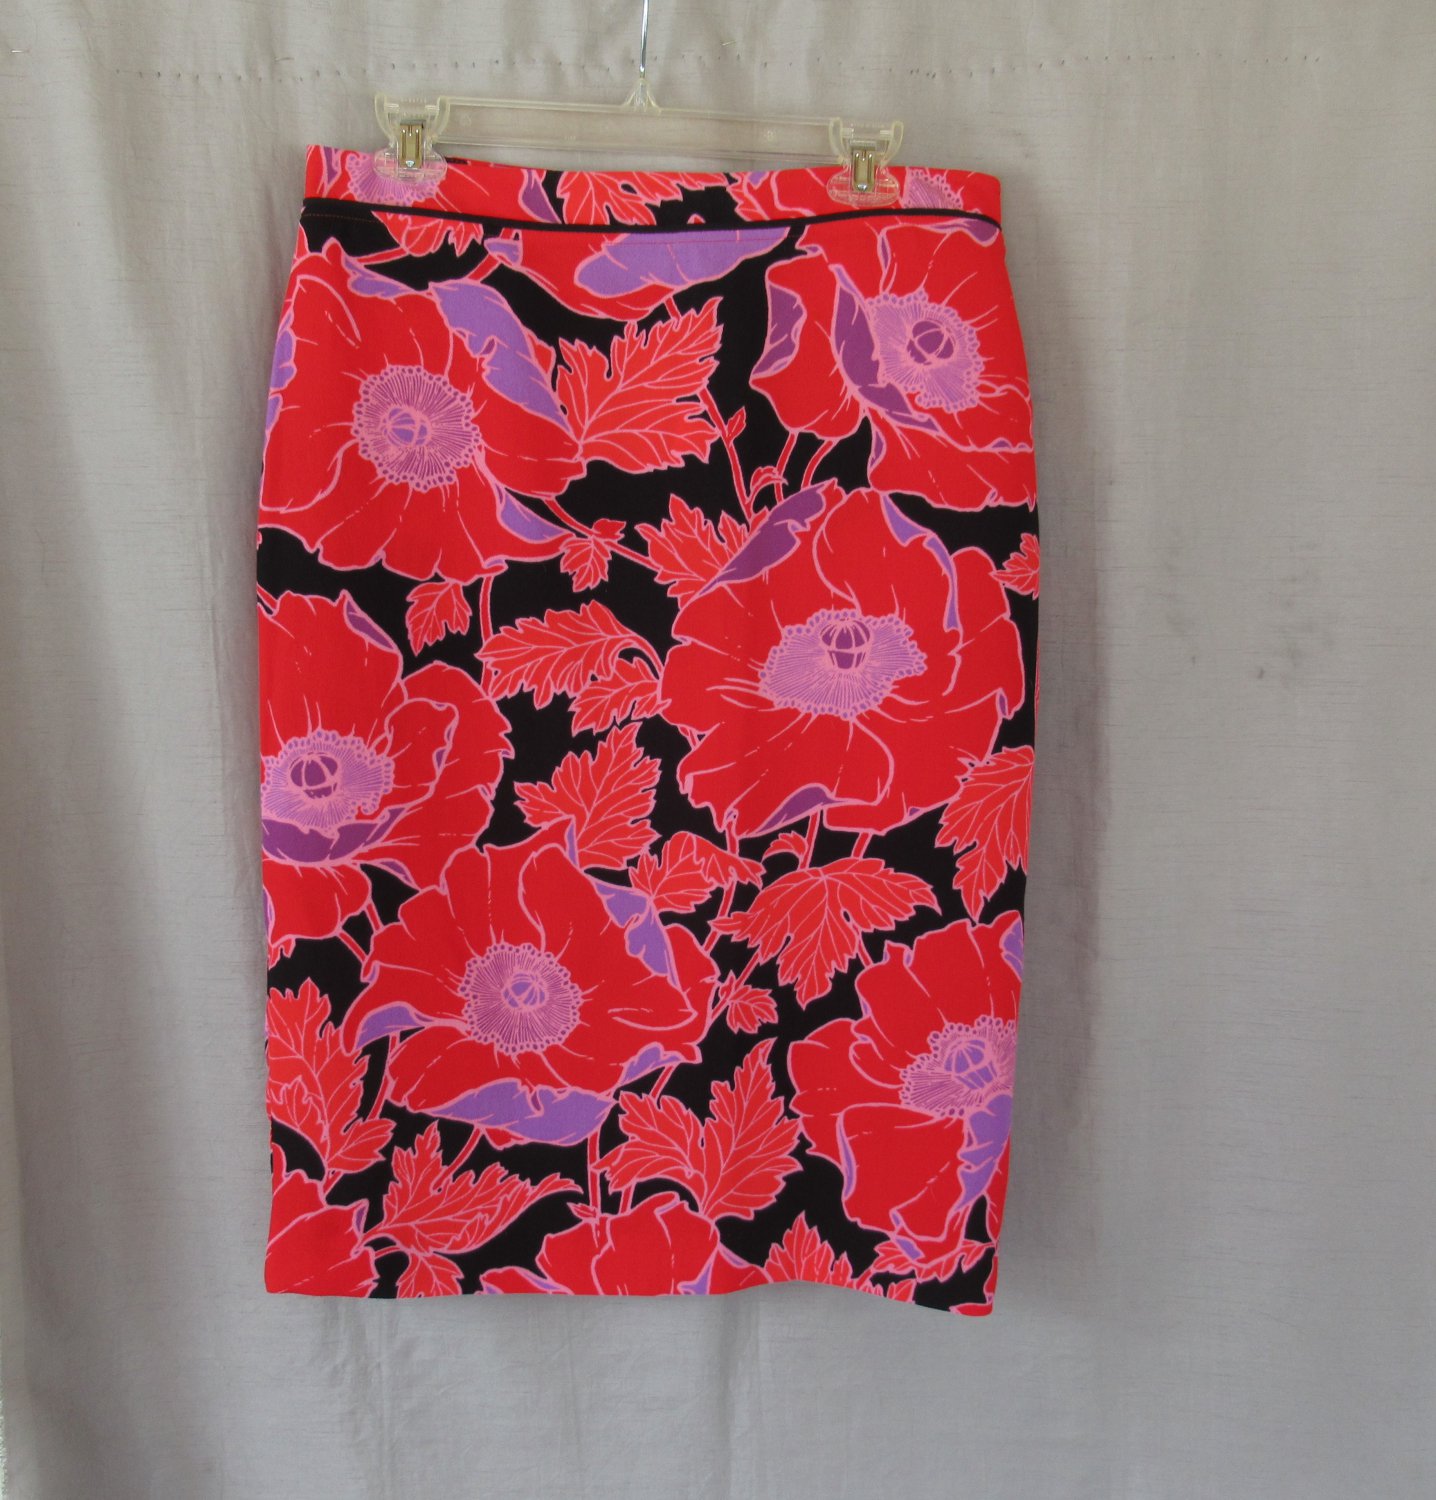 NWT Who What Wear pencil skirt 10 red poppy